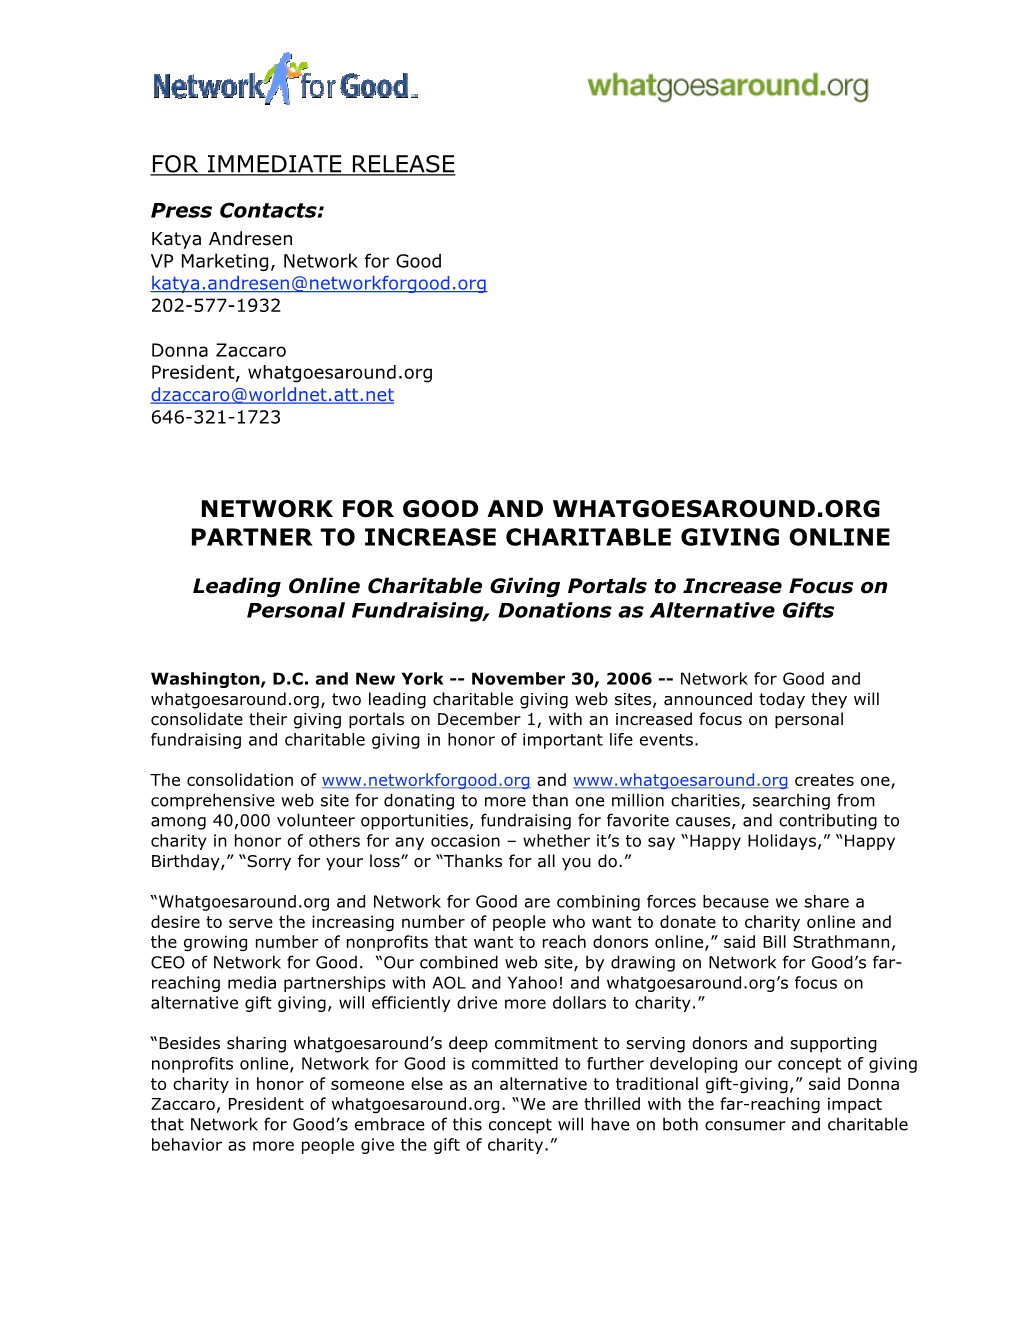 For Immediate Release Network for Good And